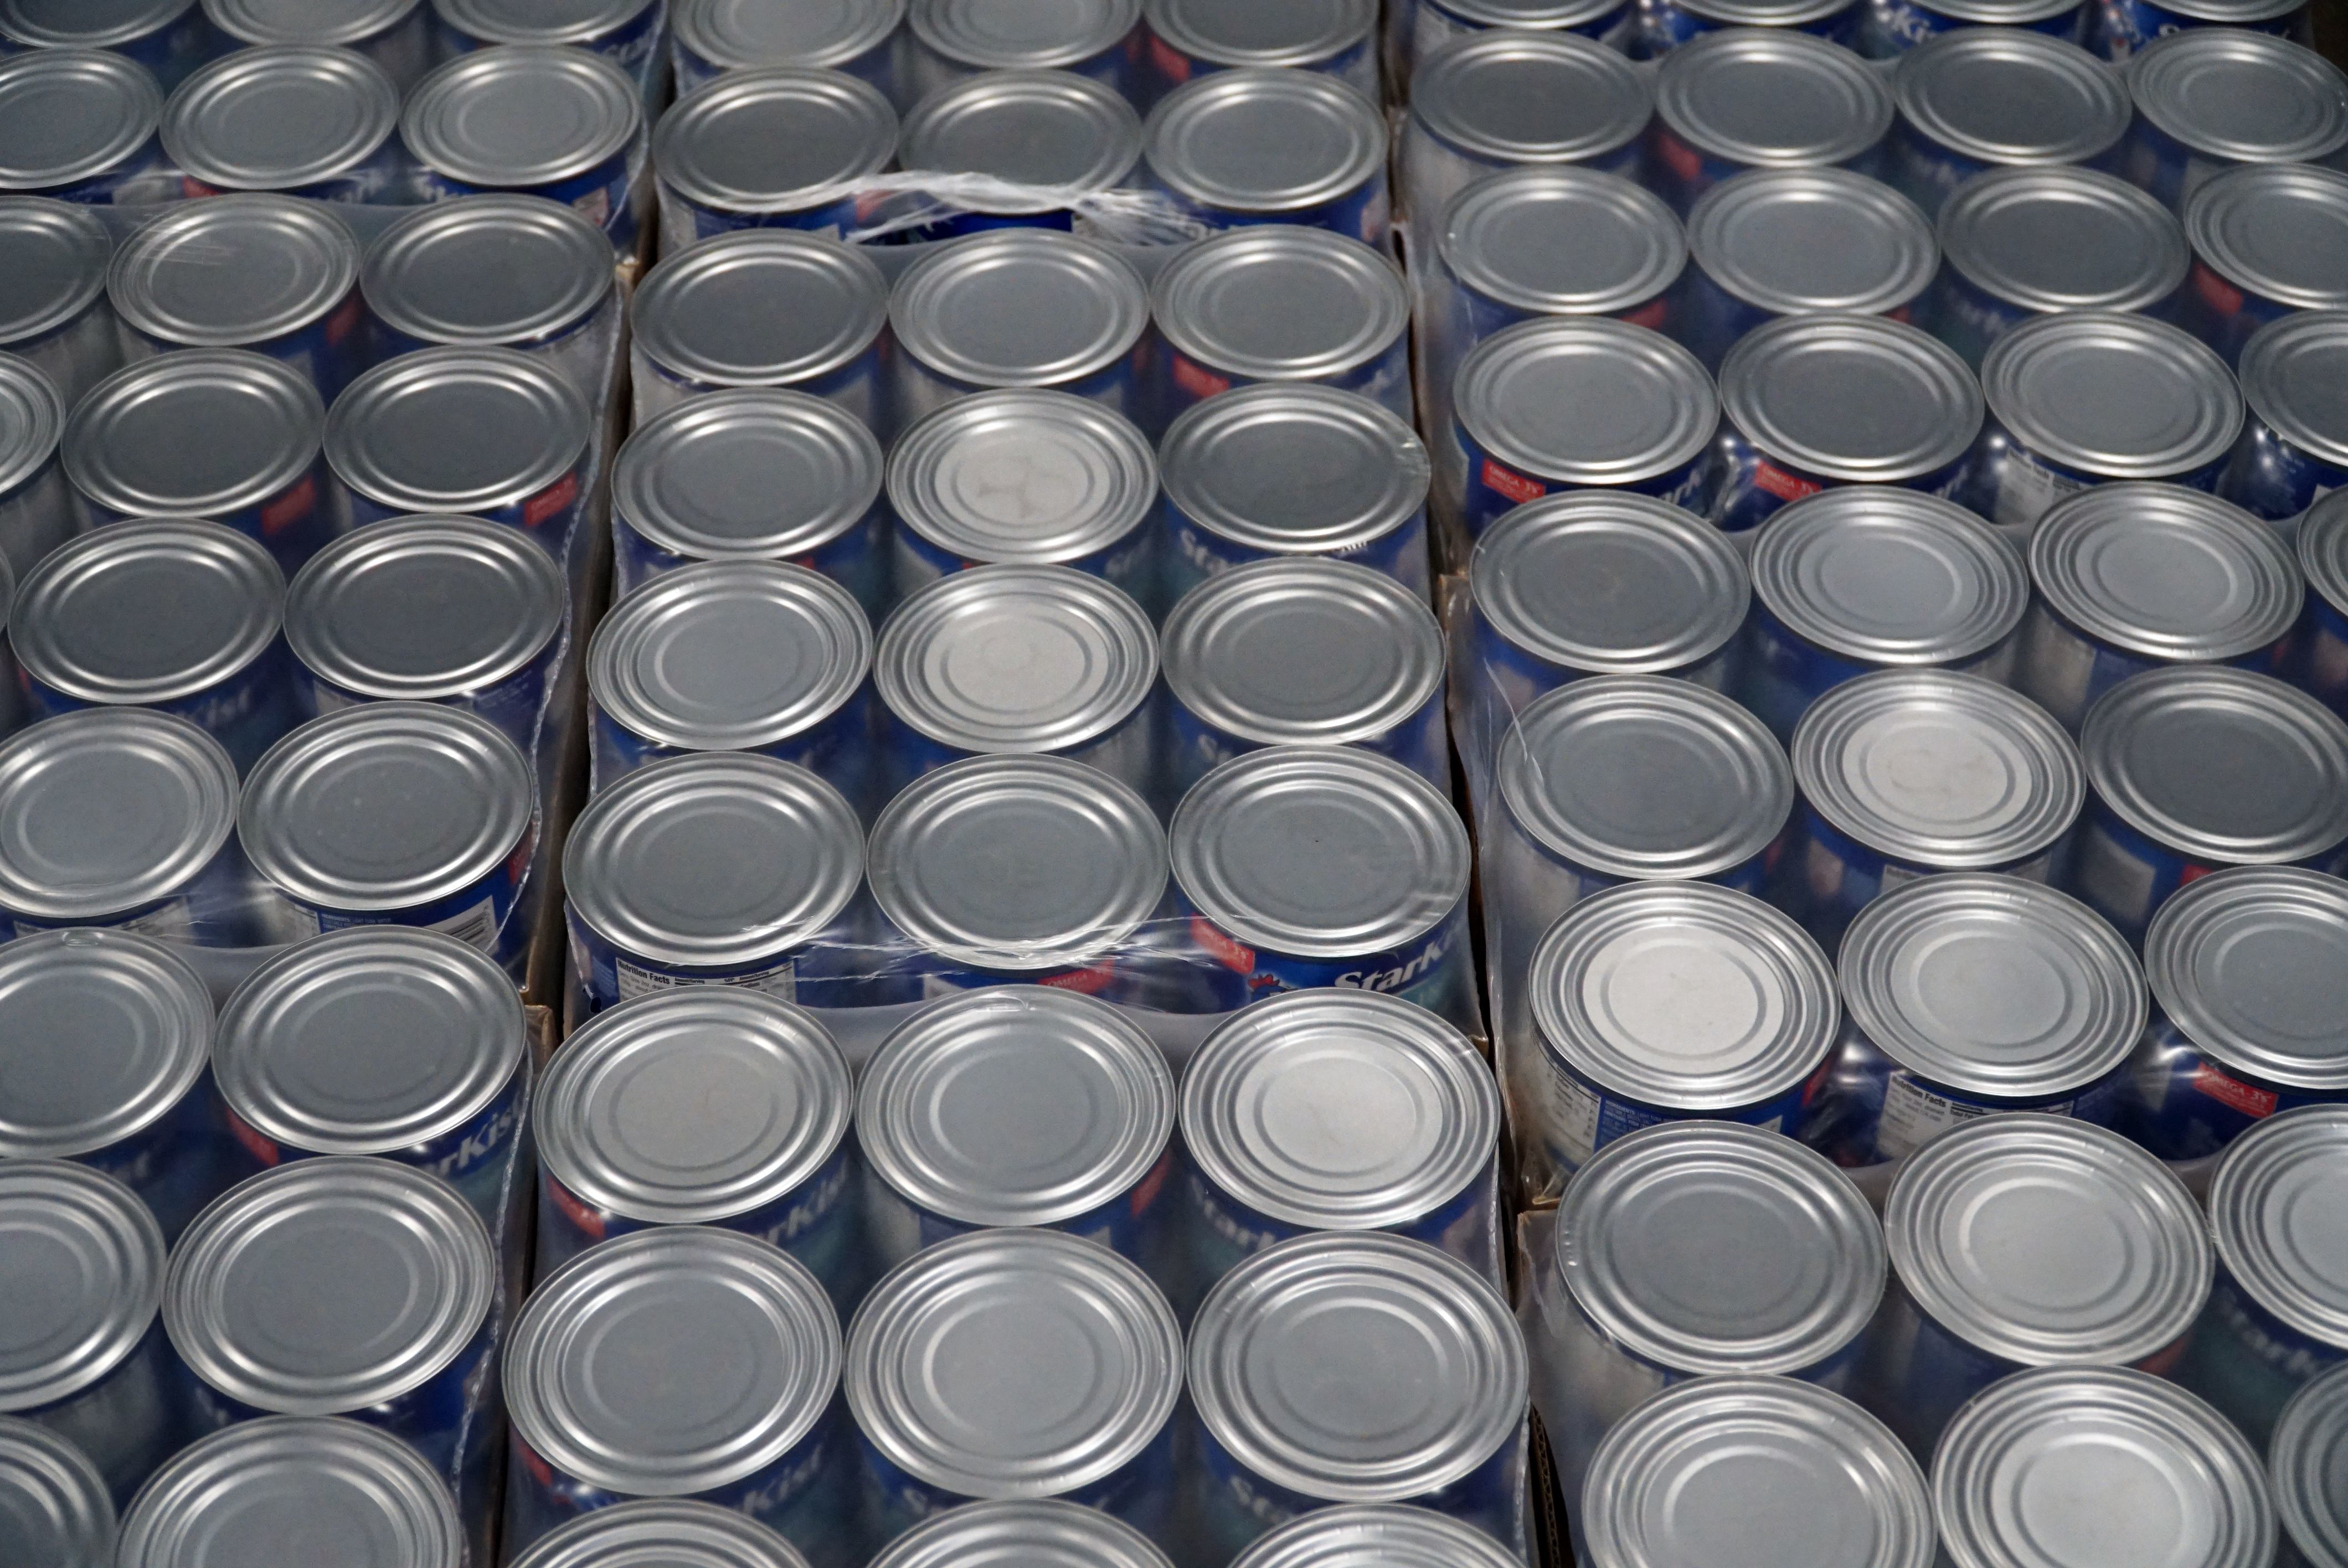 Background image of canned goods